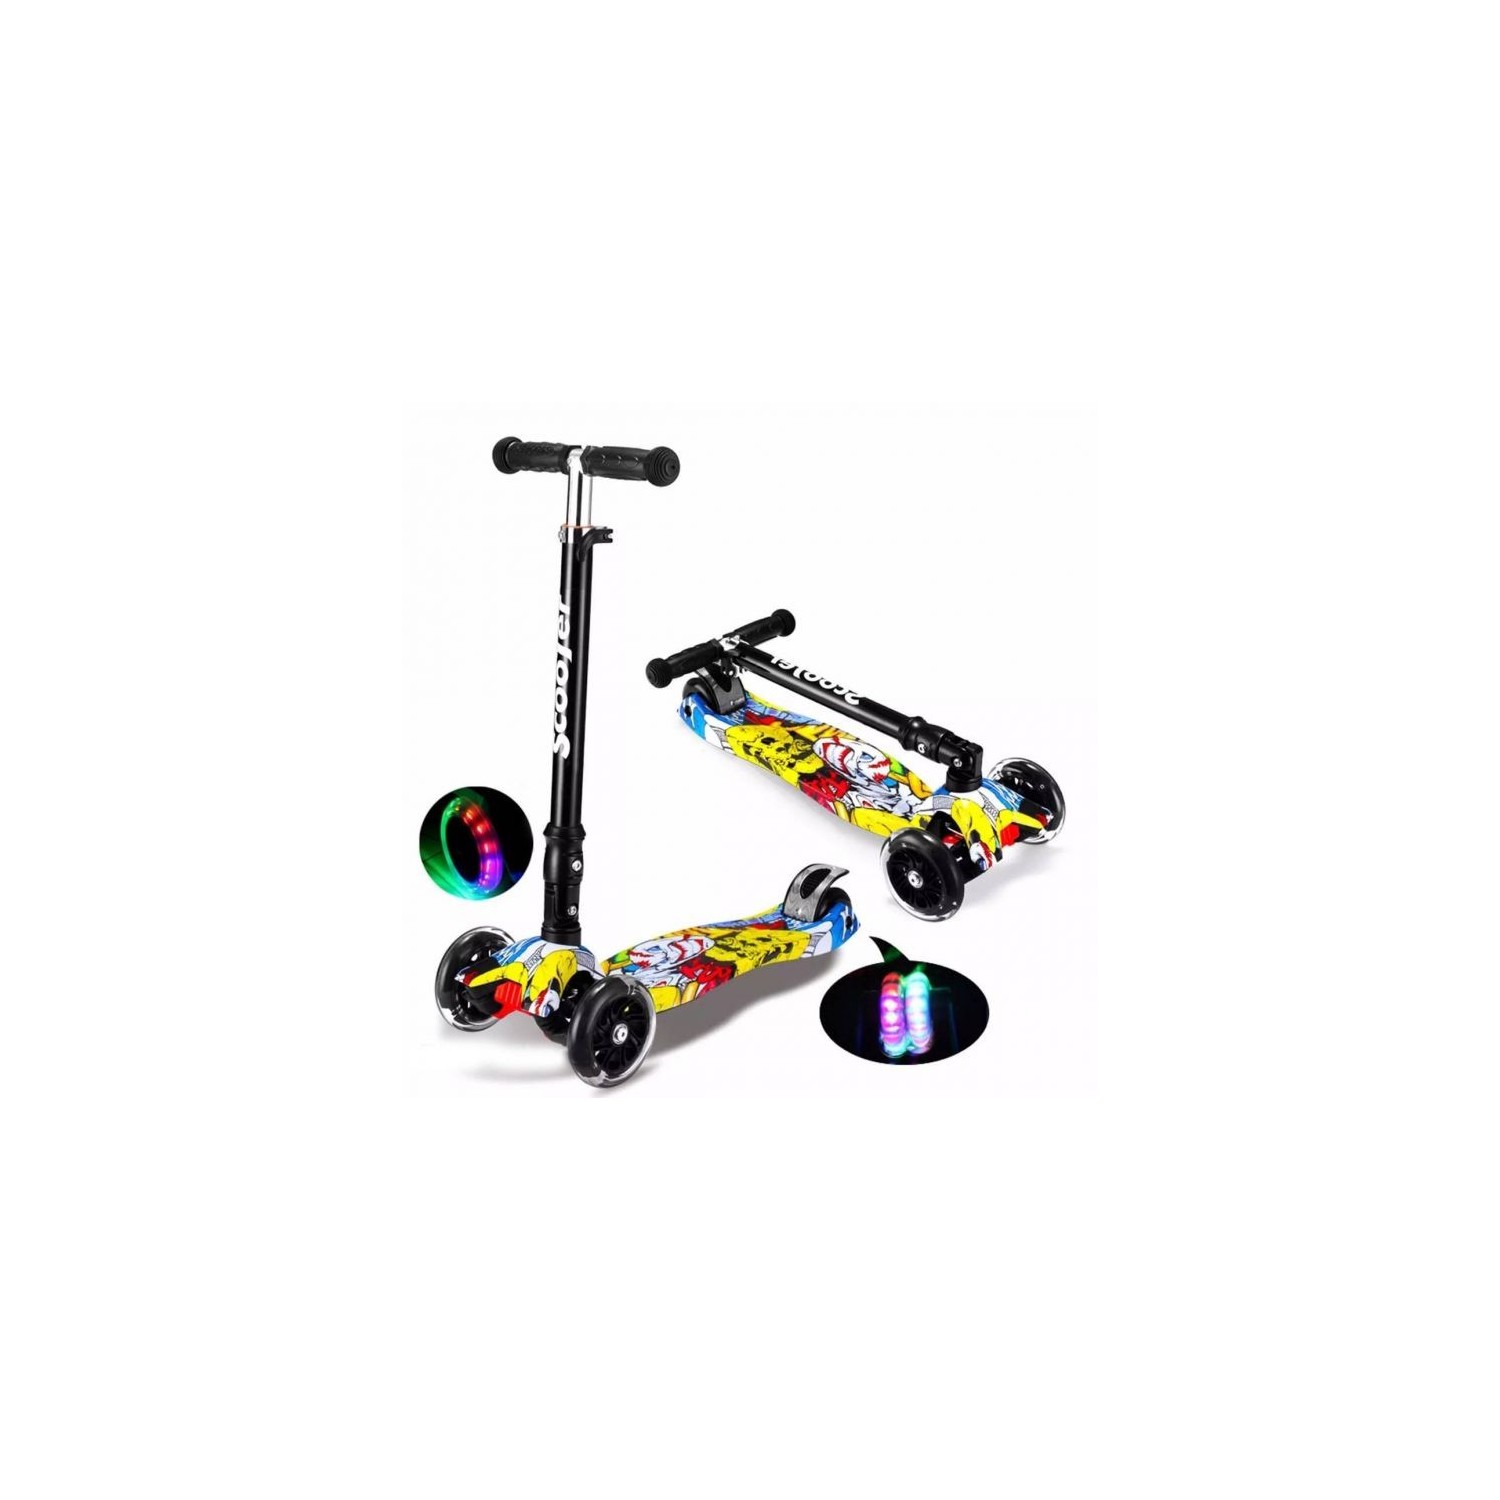 MONOPATIN SCOOTER 3 RUEDAS + LUCES LED